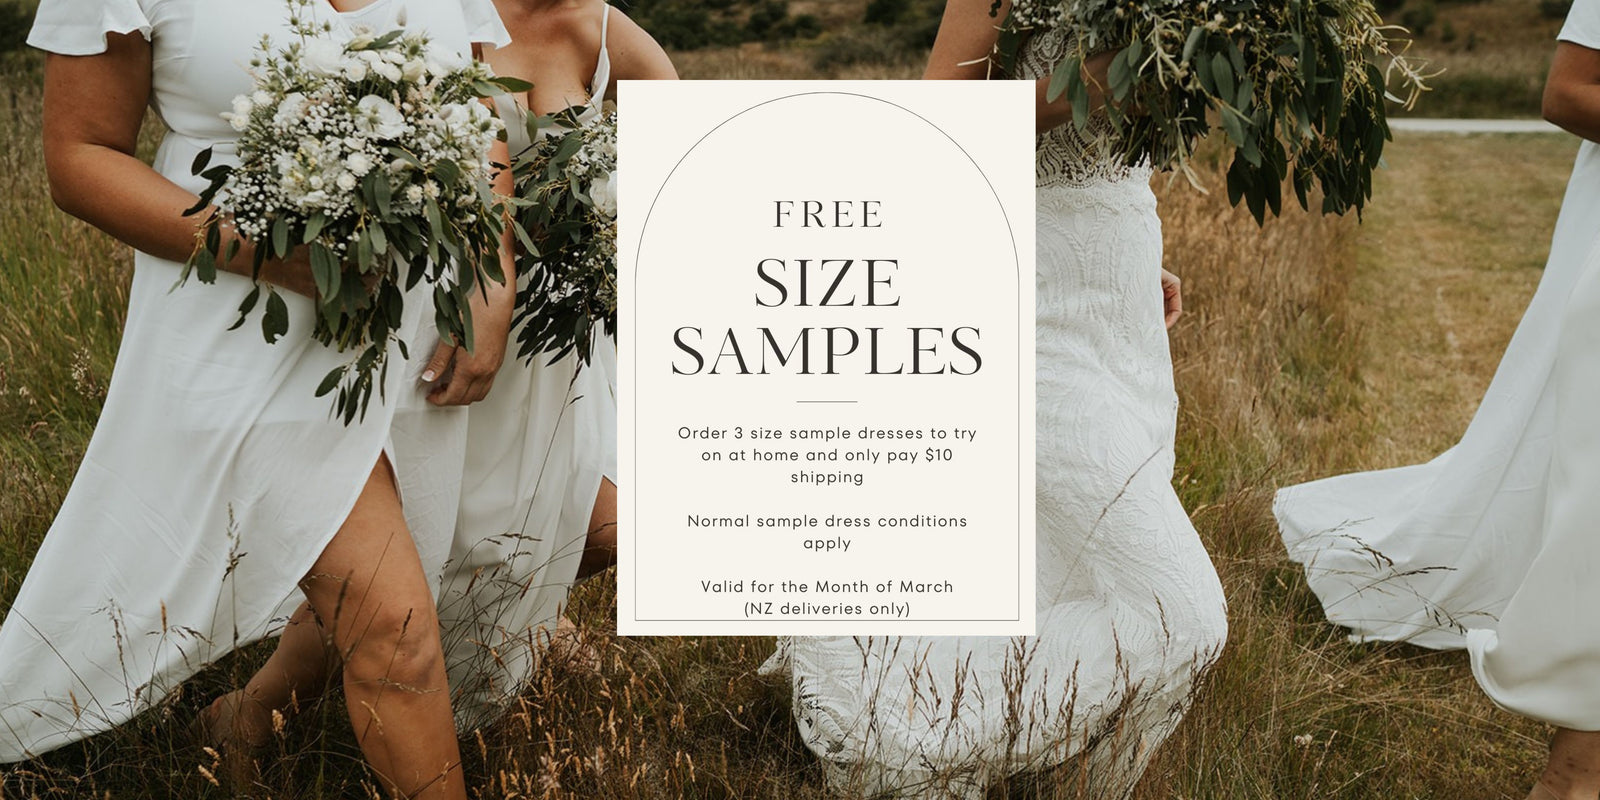 Wedding Jumpsuit and Pantsuit in Auckland - Dell'Amore Bridal